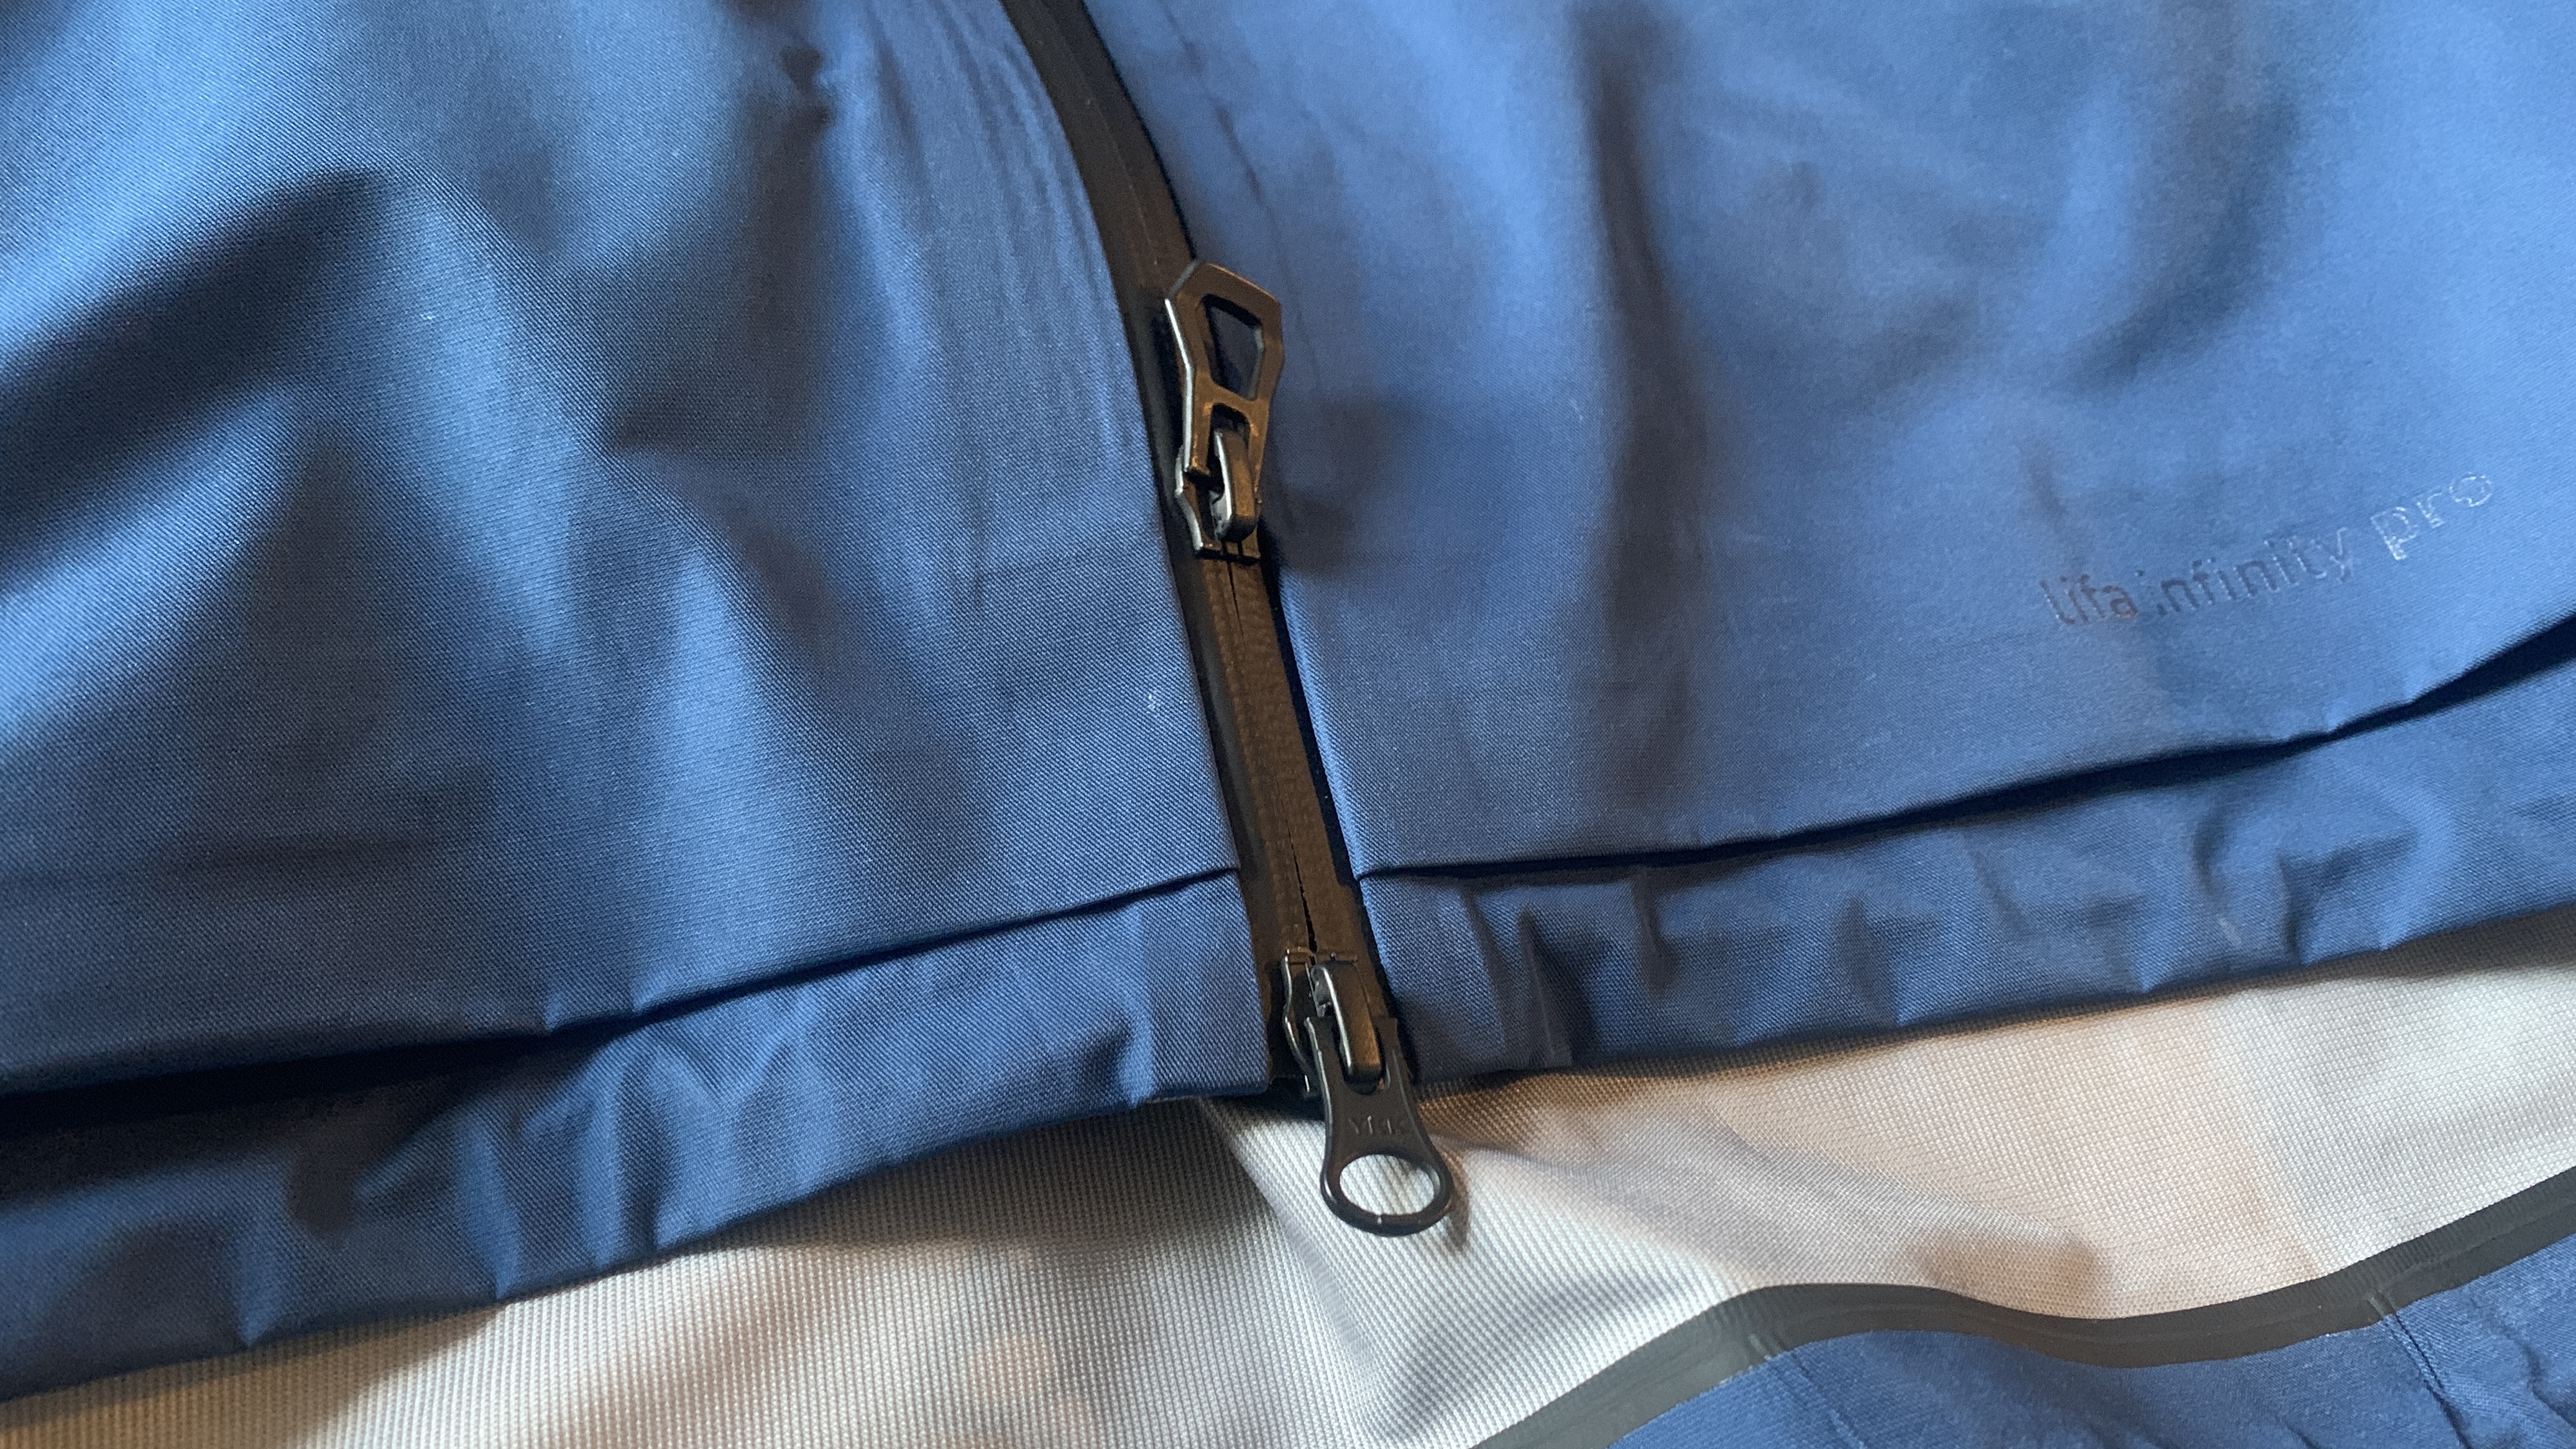 What is the point of a two-way zipper?